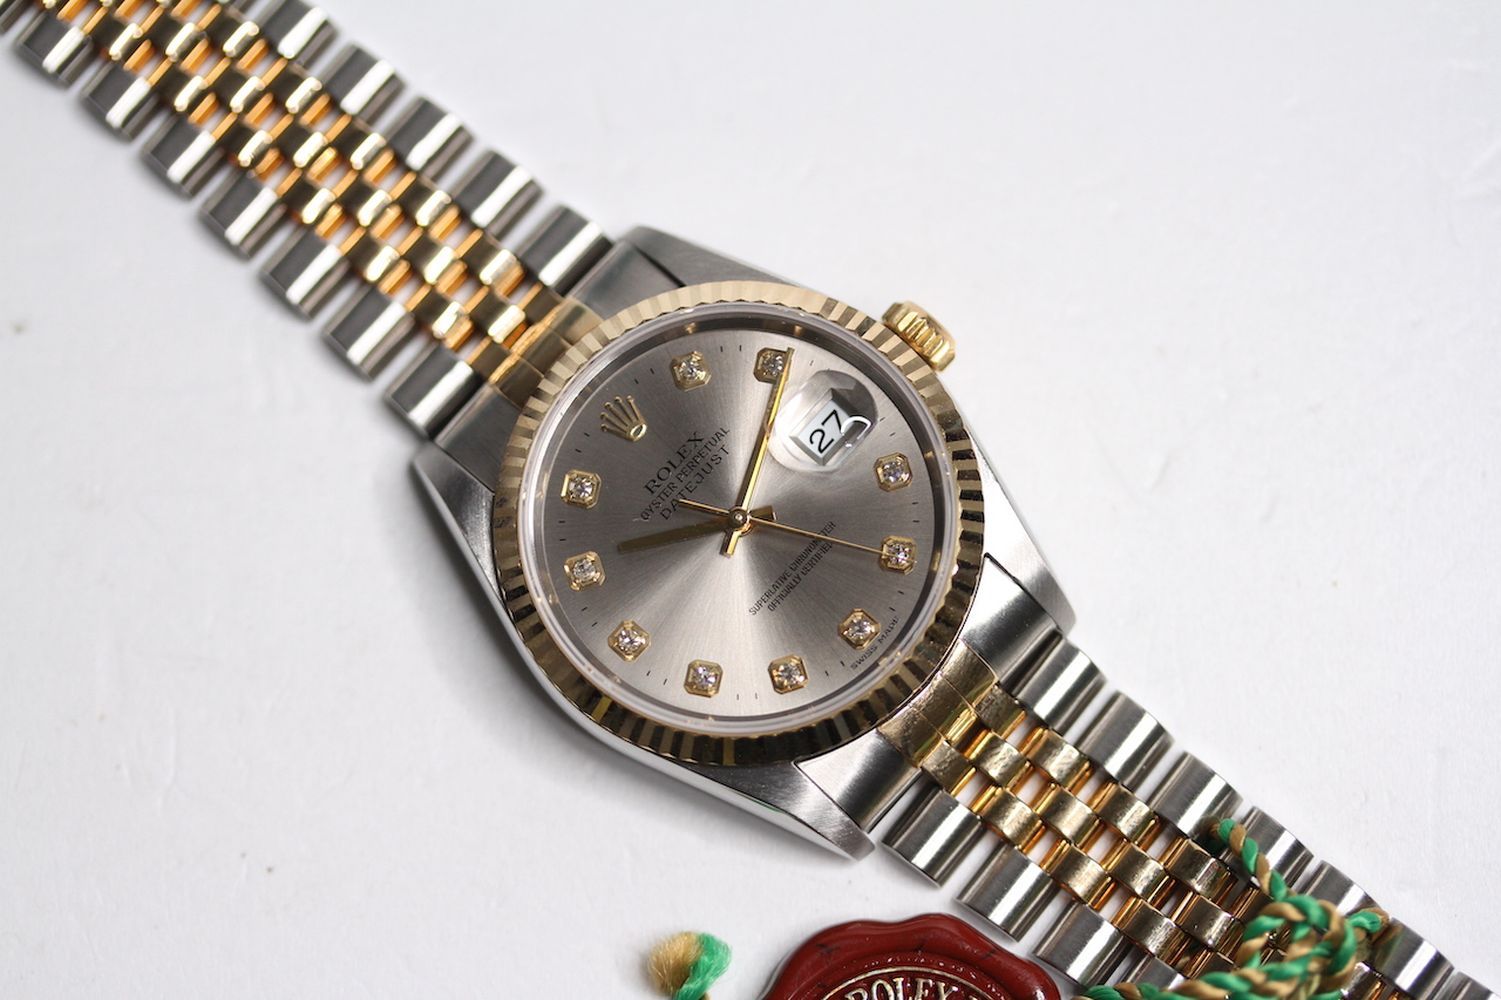 ROLEX DATEJUST STEEL AND GOLD DIAMOND DIAL REFERENCE 16233 FULL SET 2002, circular sunburst grey - Image 2 of 3